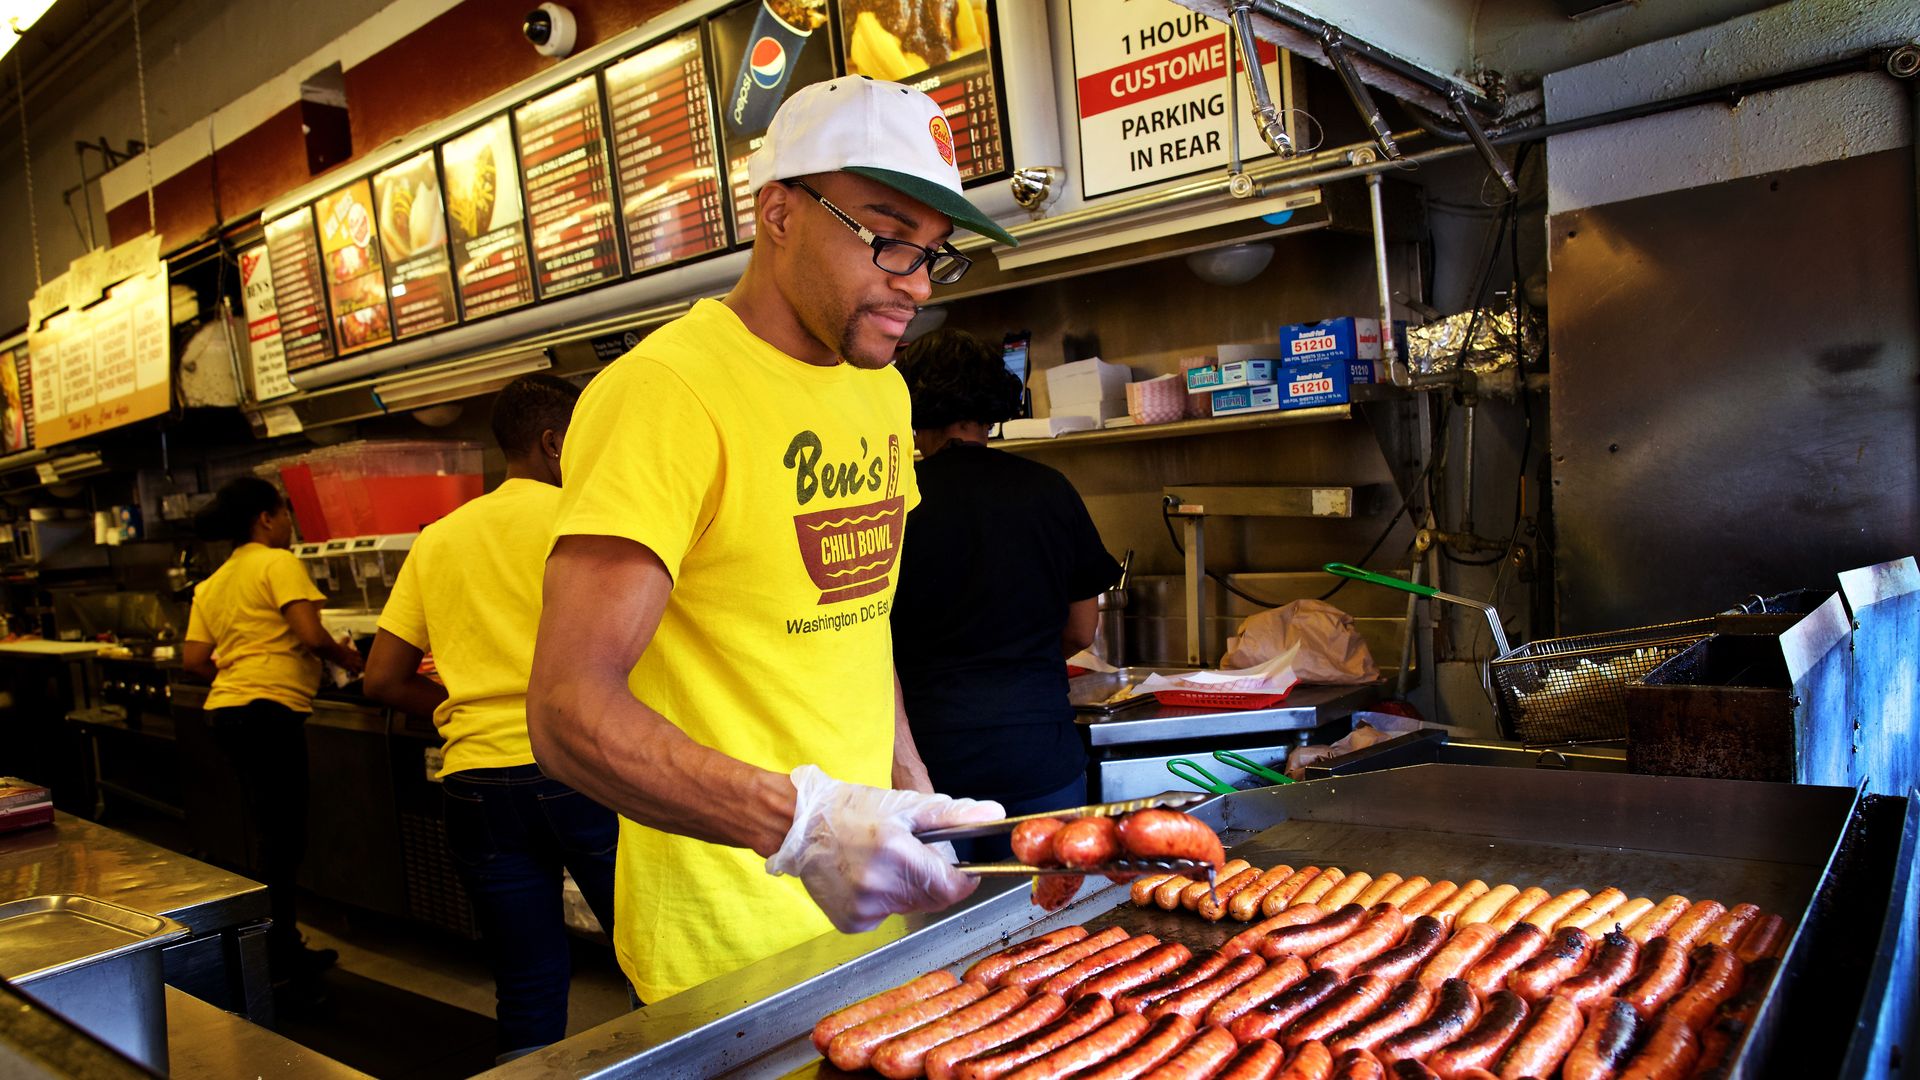 A man grilling half-smokes at Ben's Chili Bowl in DC